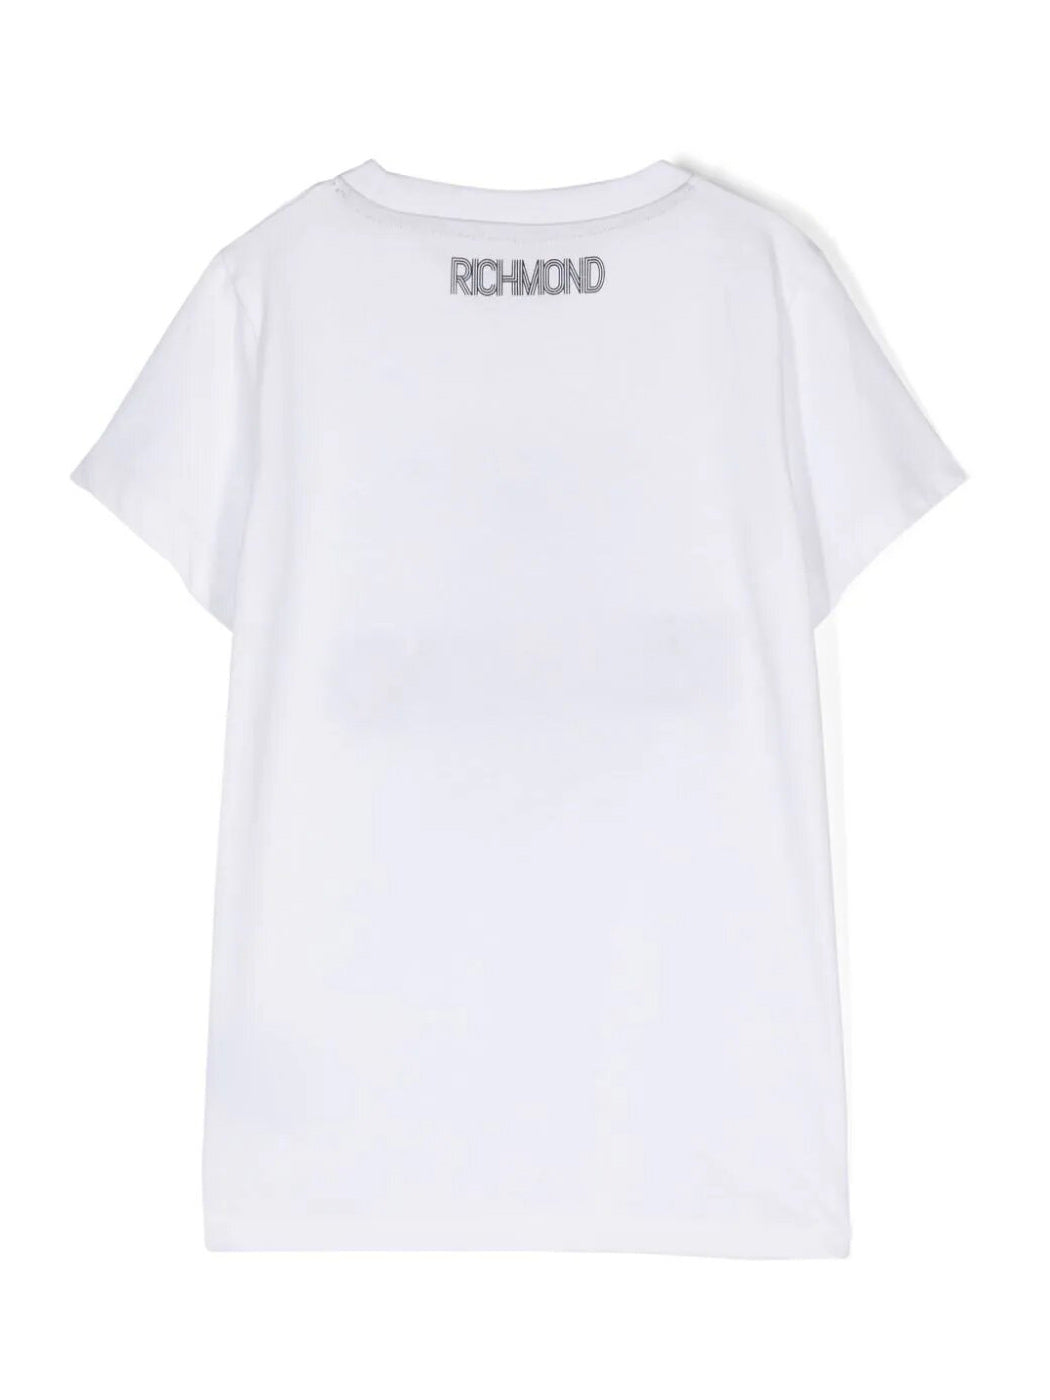 John Richmond cotton T-shirt with embroidery